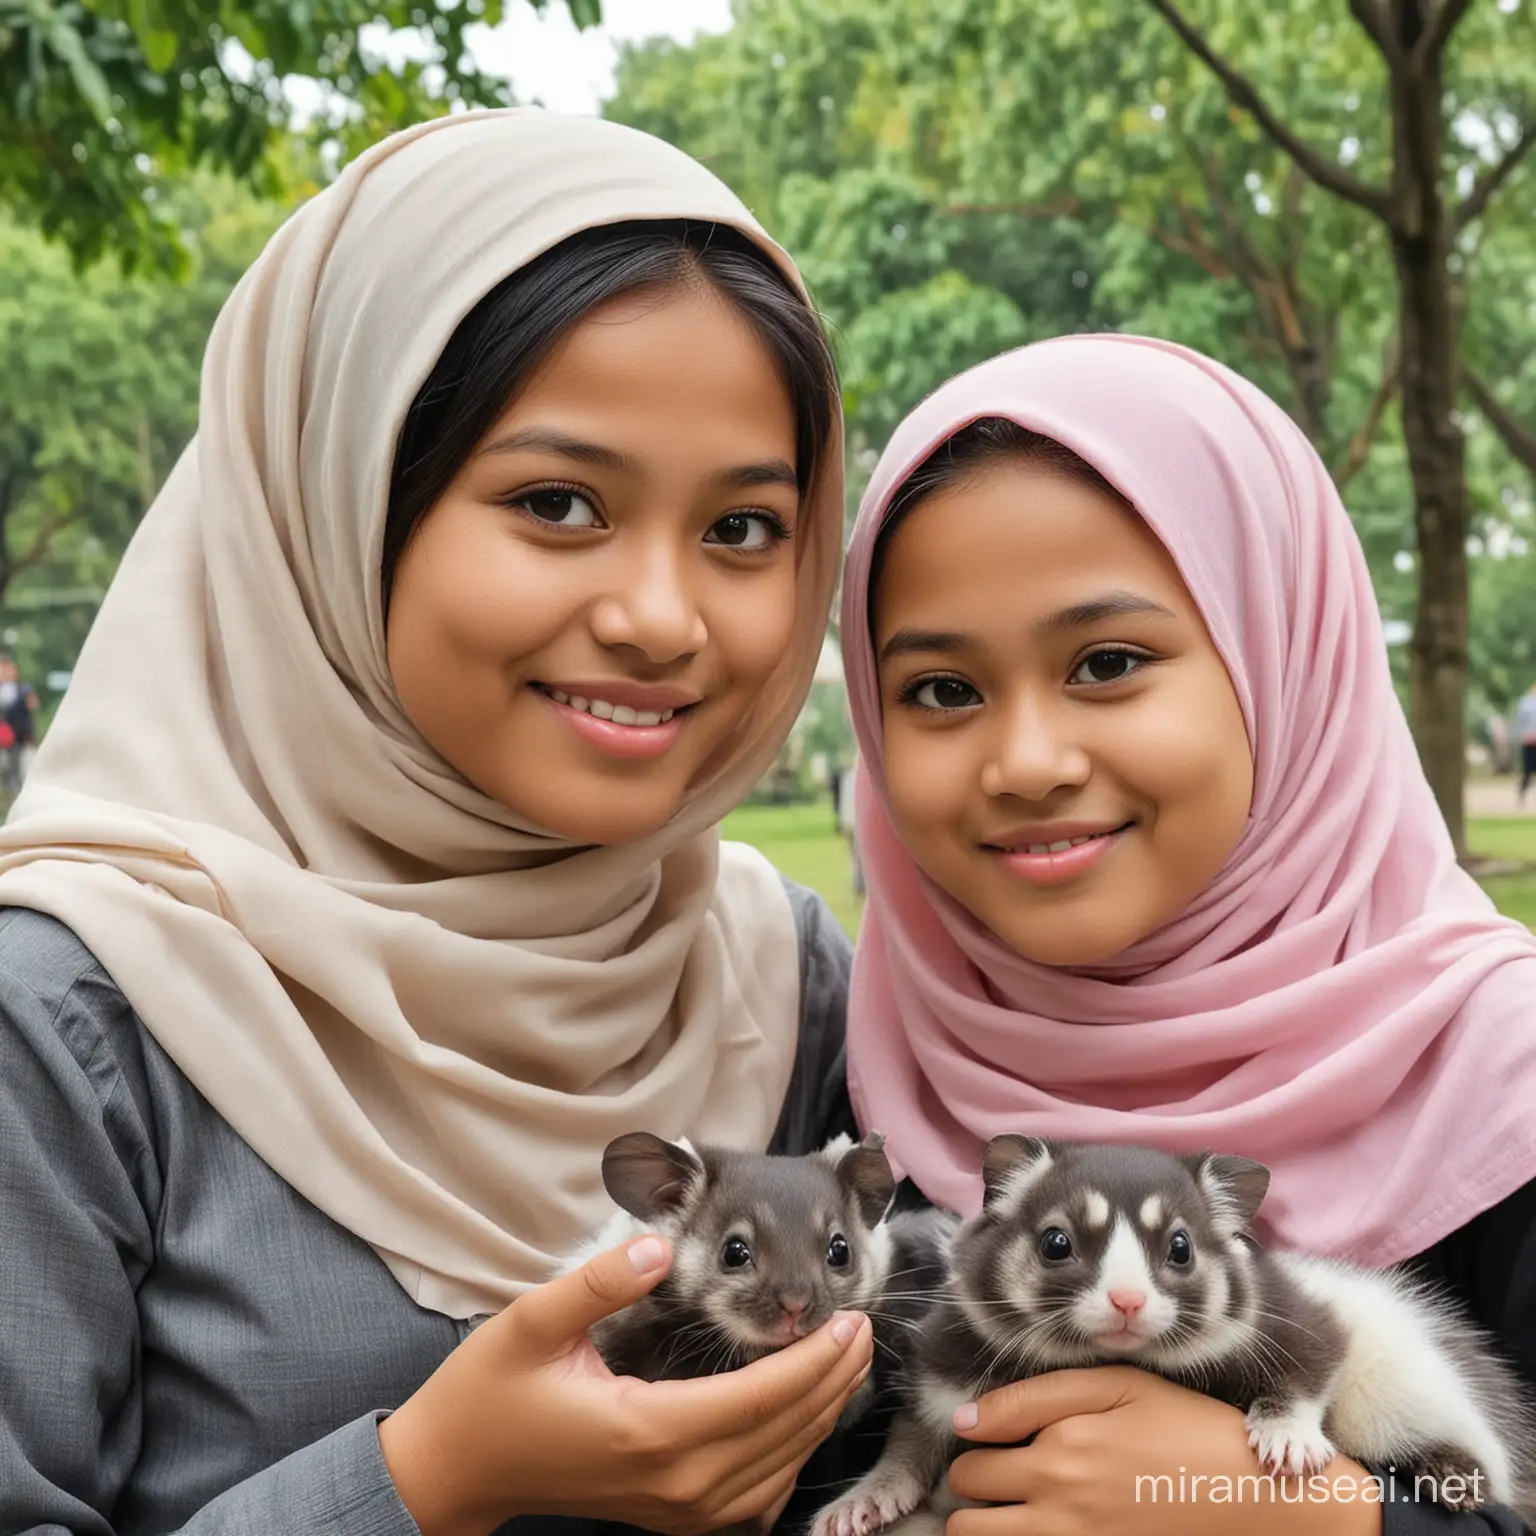 Sisters Bonding in Park Indonesian Girl with Hijab and Toddler Sister Holding Sugar Glider